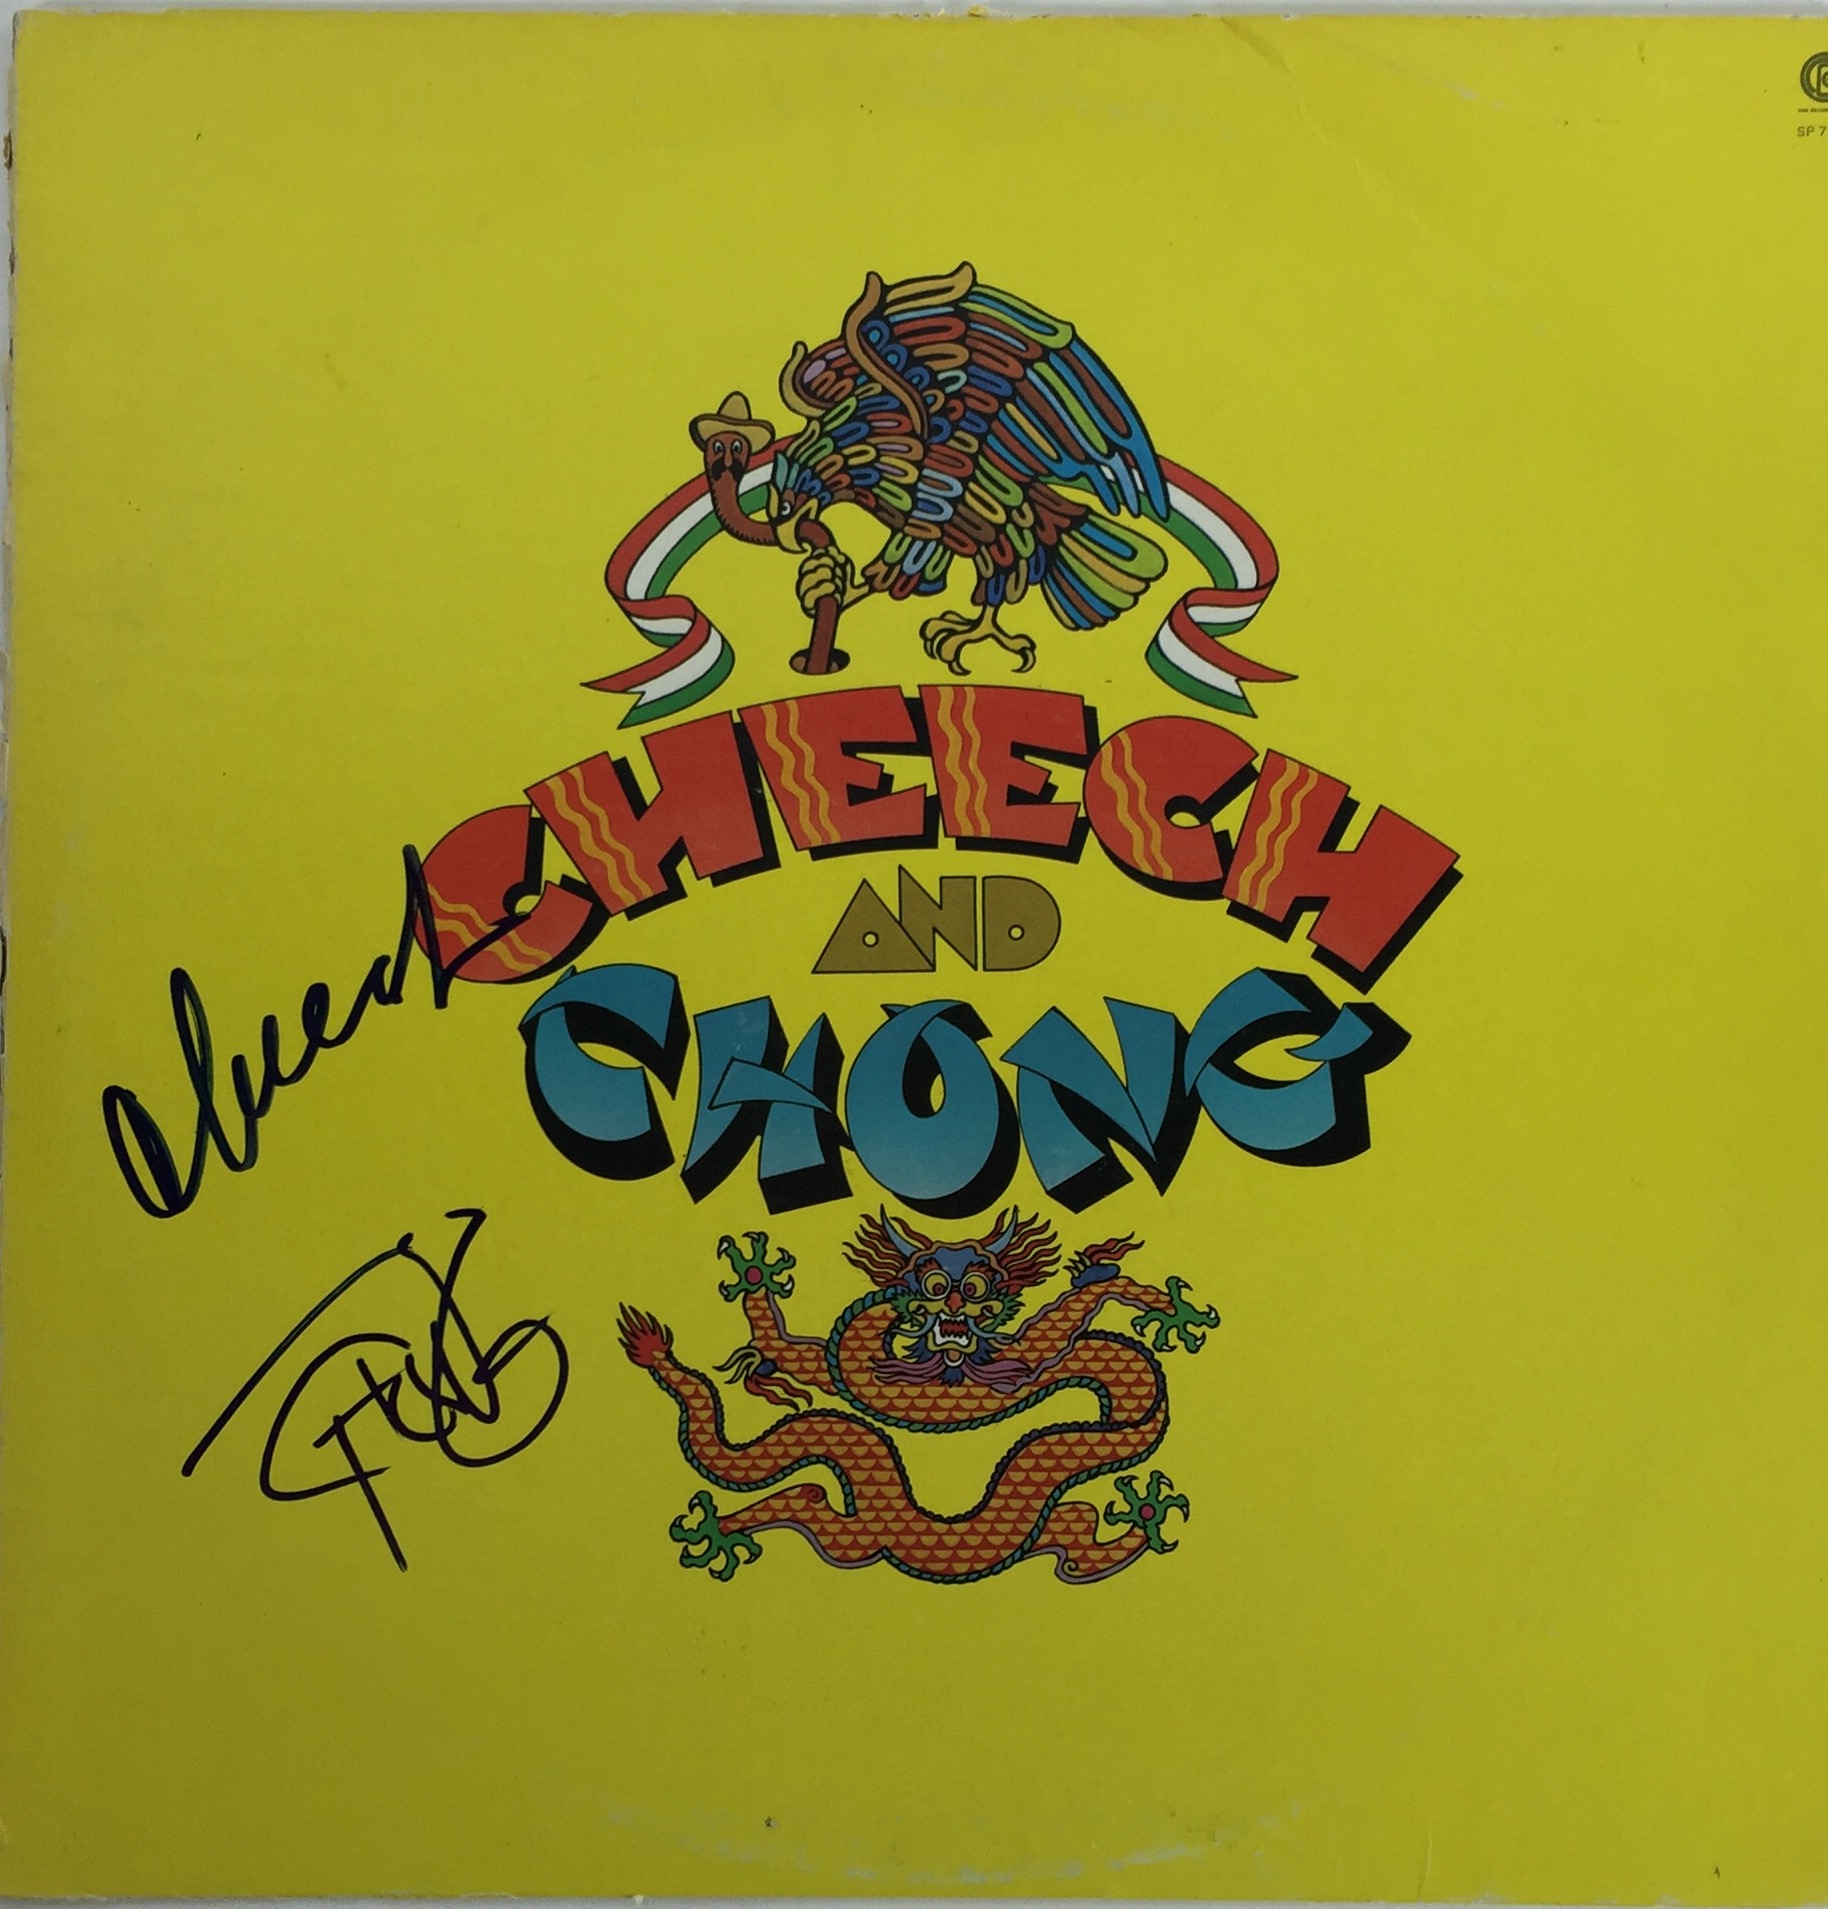 Cheech and chong album covers